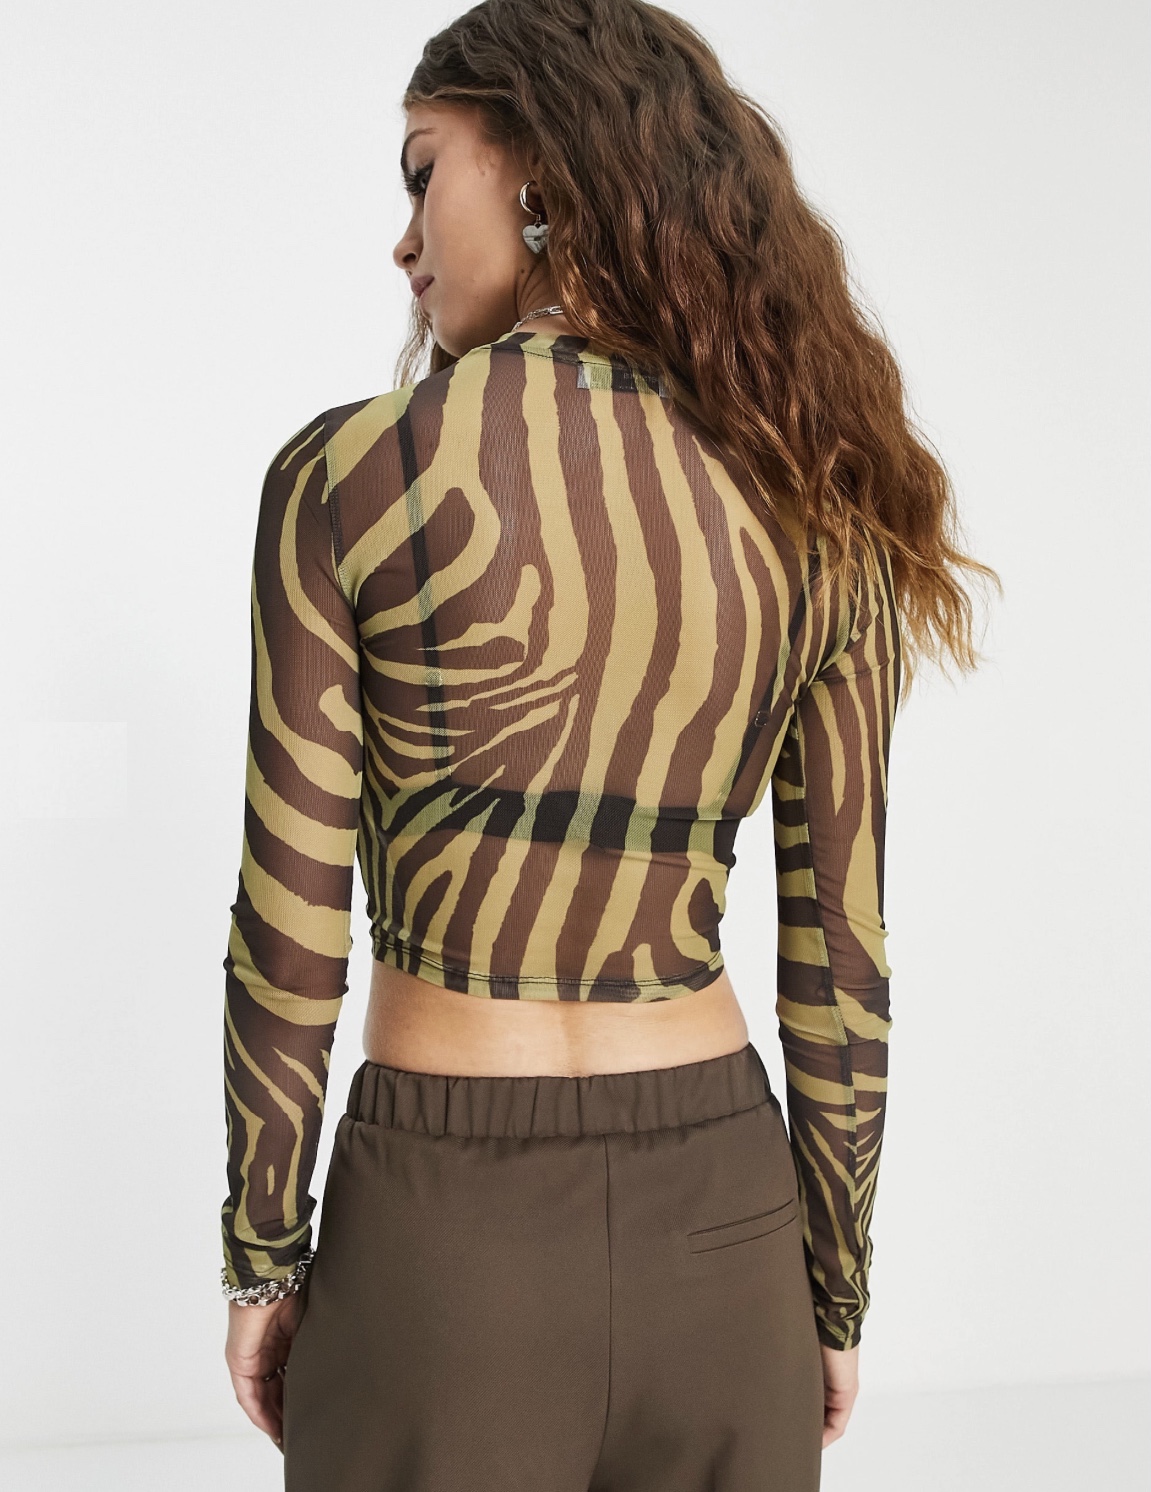 Animal Print Mesh Top in Green and Brown – LA CHIC PICK